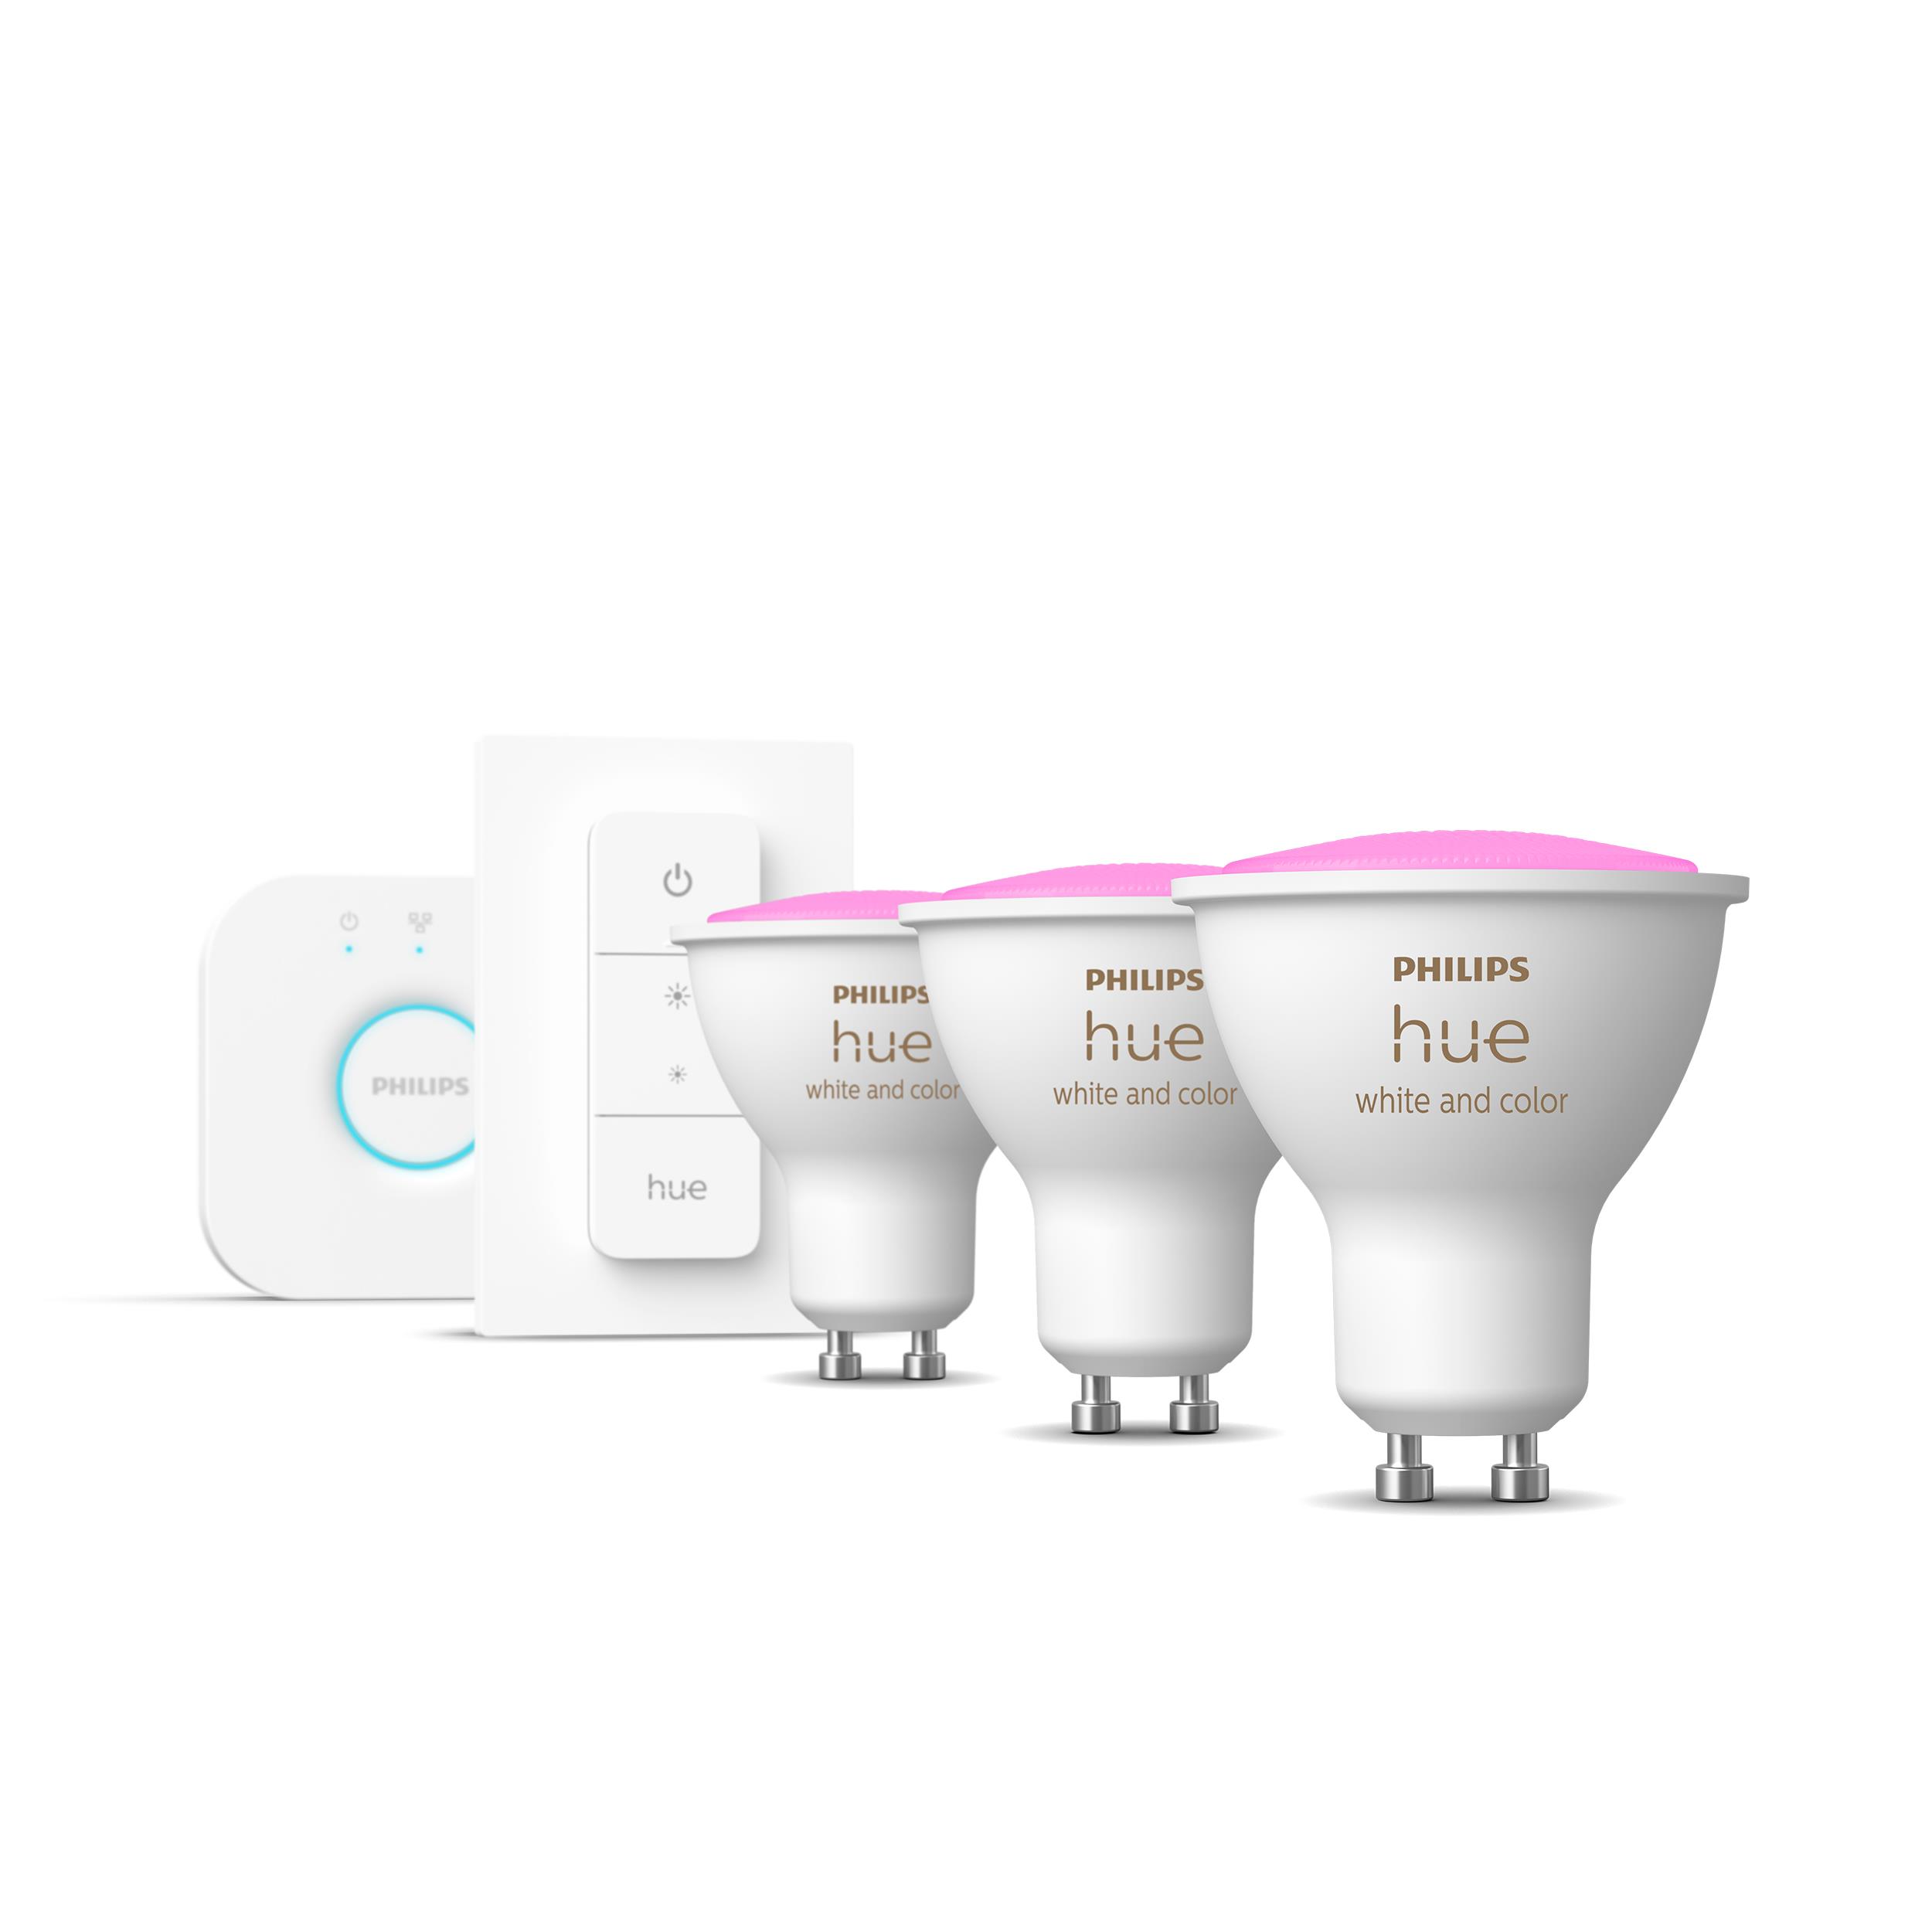 Bec LED Spot Philips Hue alb and Color Ambiance LED GU10 Triple Starter Kit cu button dimming 350lm